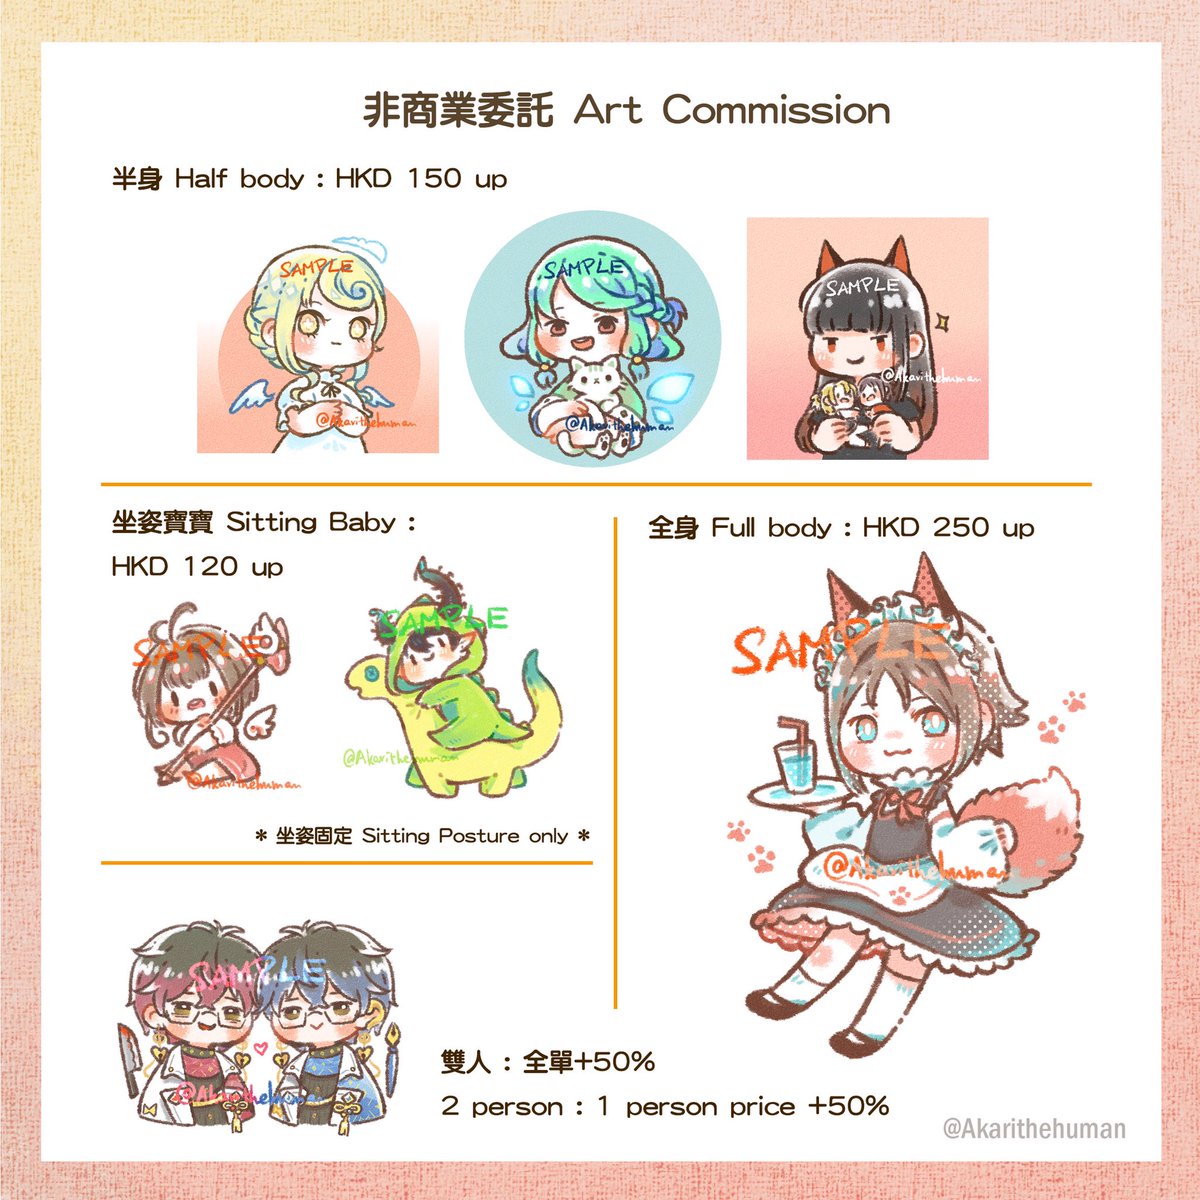 Commission open🎨

試接委託,有興趣可私信 (緊張

另外每單會捐25%去幫助動物的團體,希望可以畫畫之餘回饋社會><

Feel free to DM me if you're interested. 

25% of my income will be donated to animal charities. Hope I can help the society through drawing! 